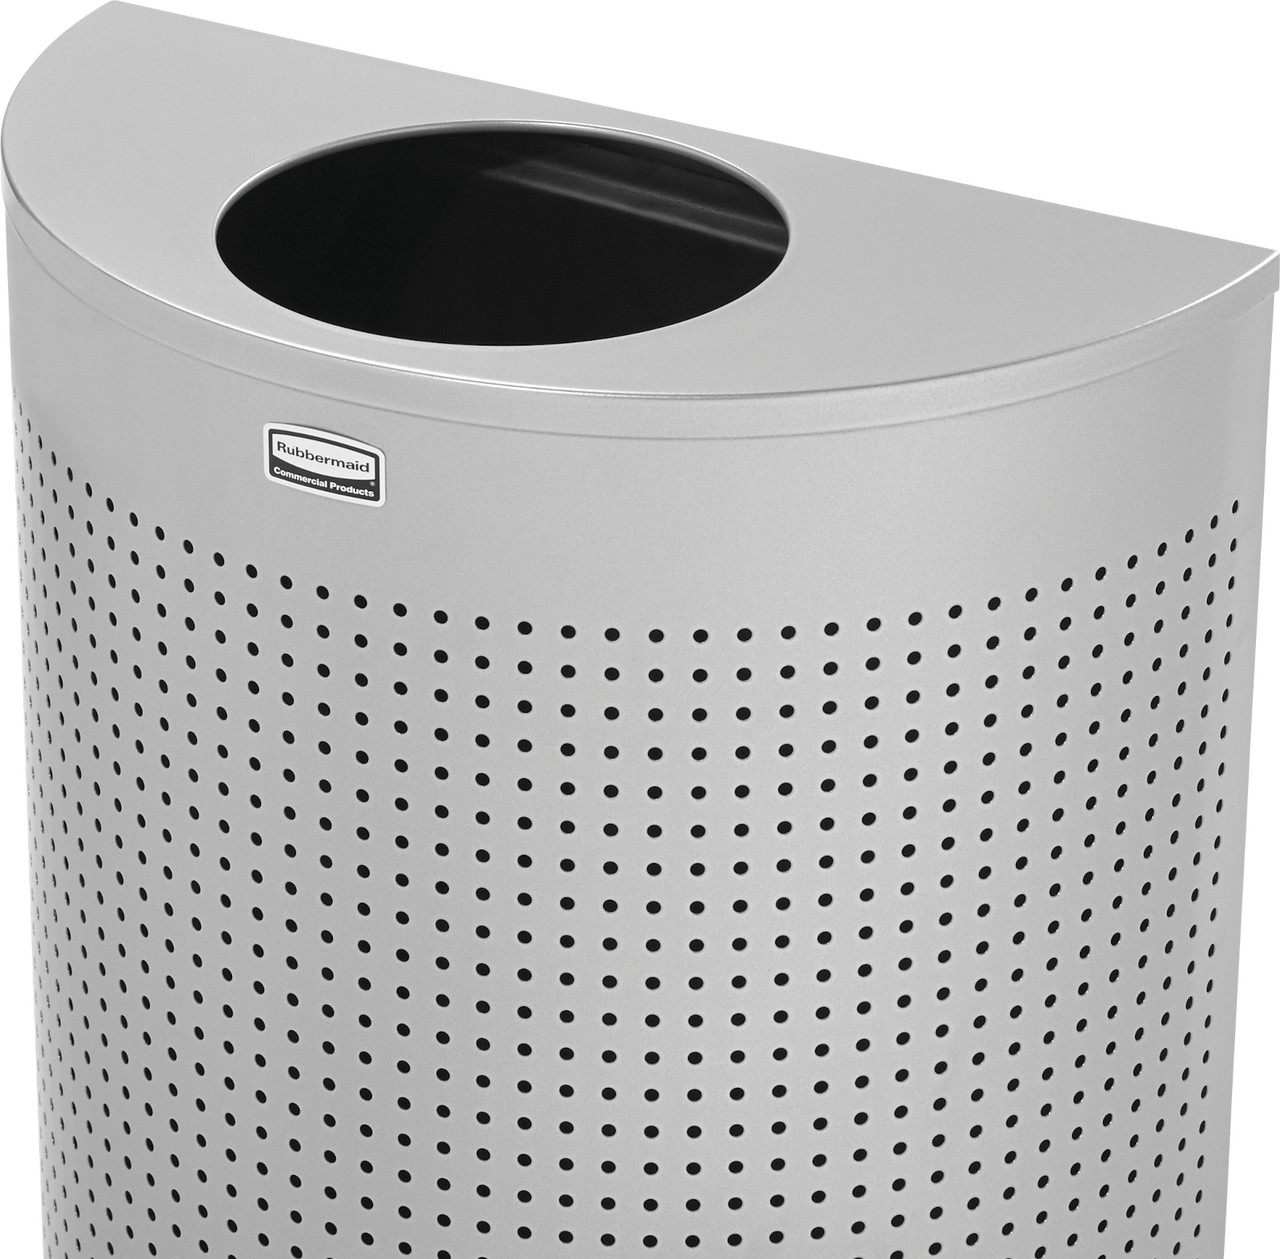 FGSH12EPLSM - Rubbermaid Silhouettes Half-Round Open Top Bin - 45 Ltr - Perforated Steel - Overhead